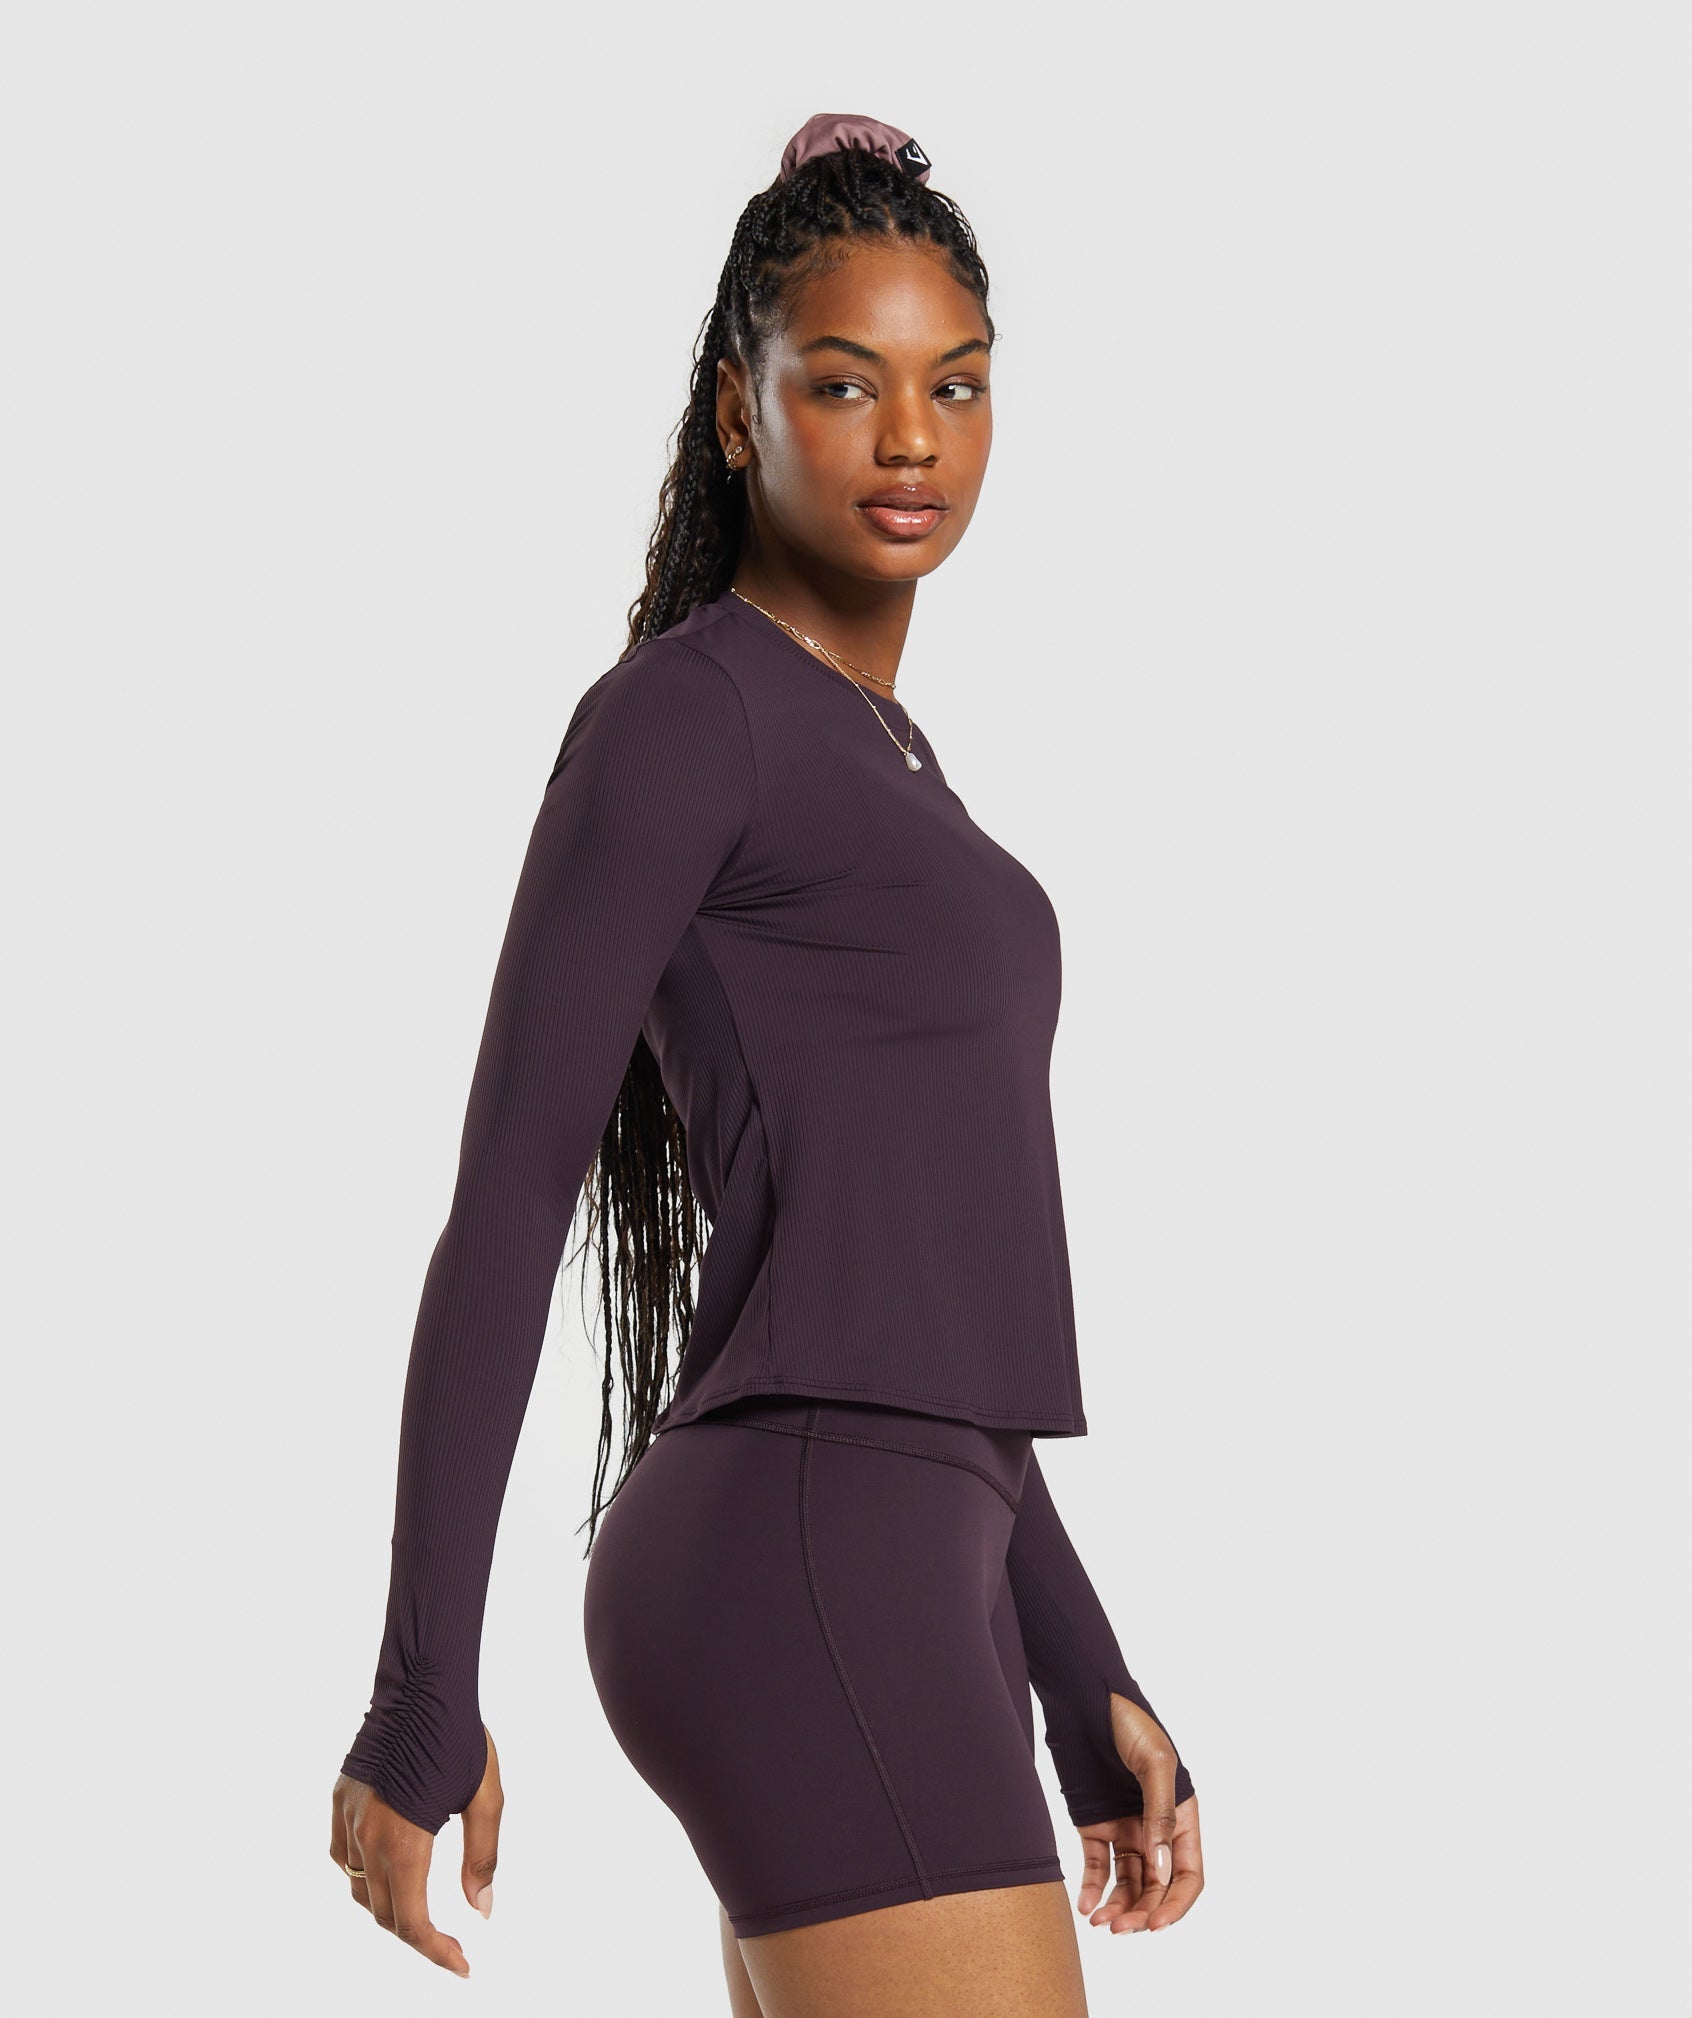 Elevate Long Sleeve Ruched Top in Plum Brown - view 3